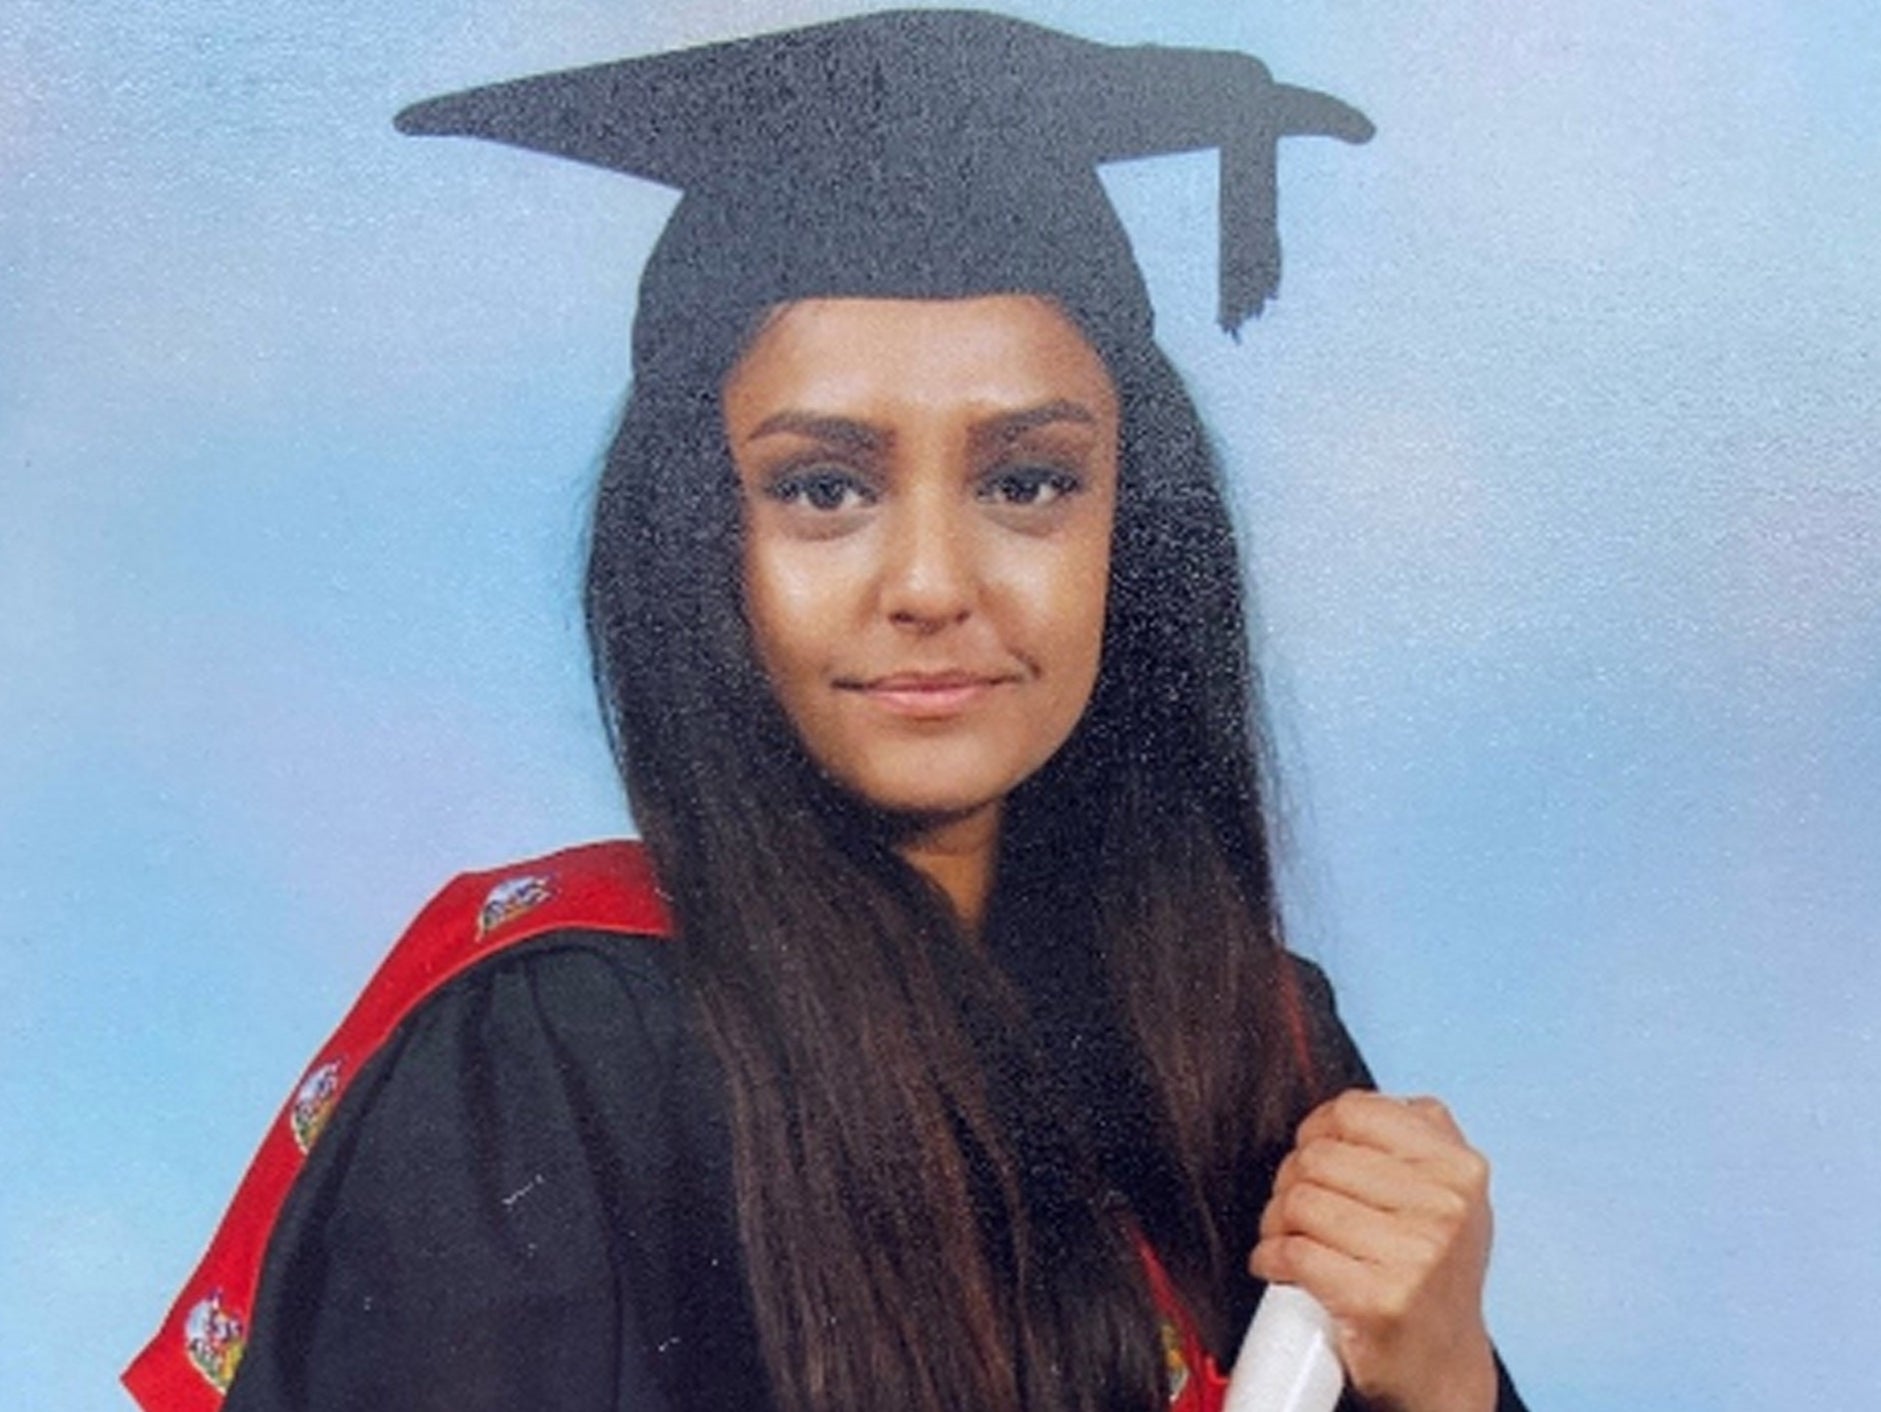 Sabina Nessa was killed on September 17 and her body was found next day in Cator Park